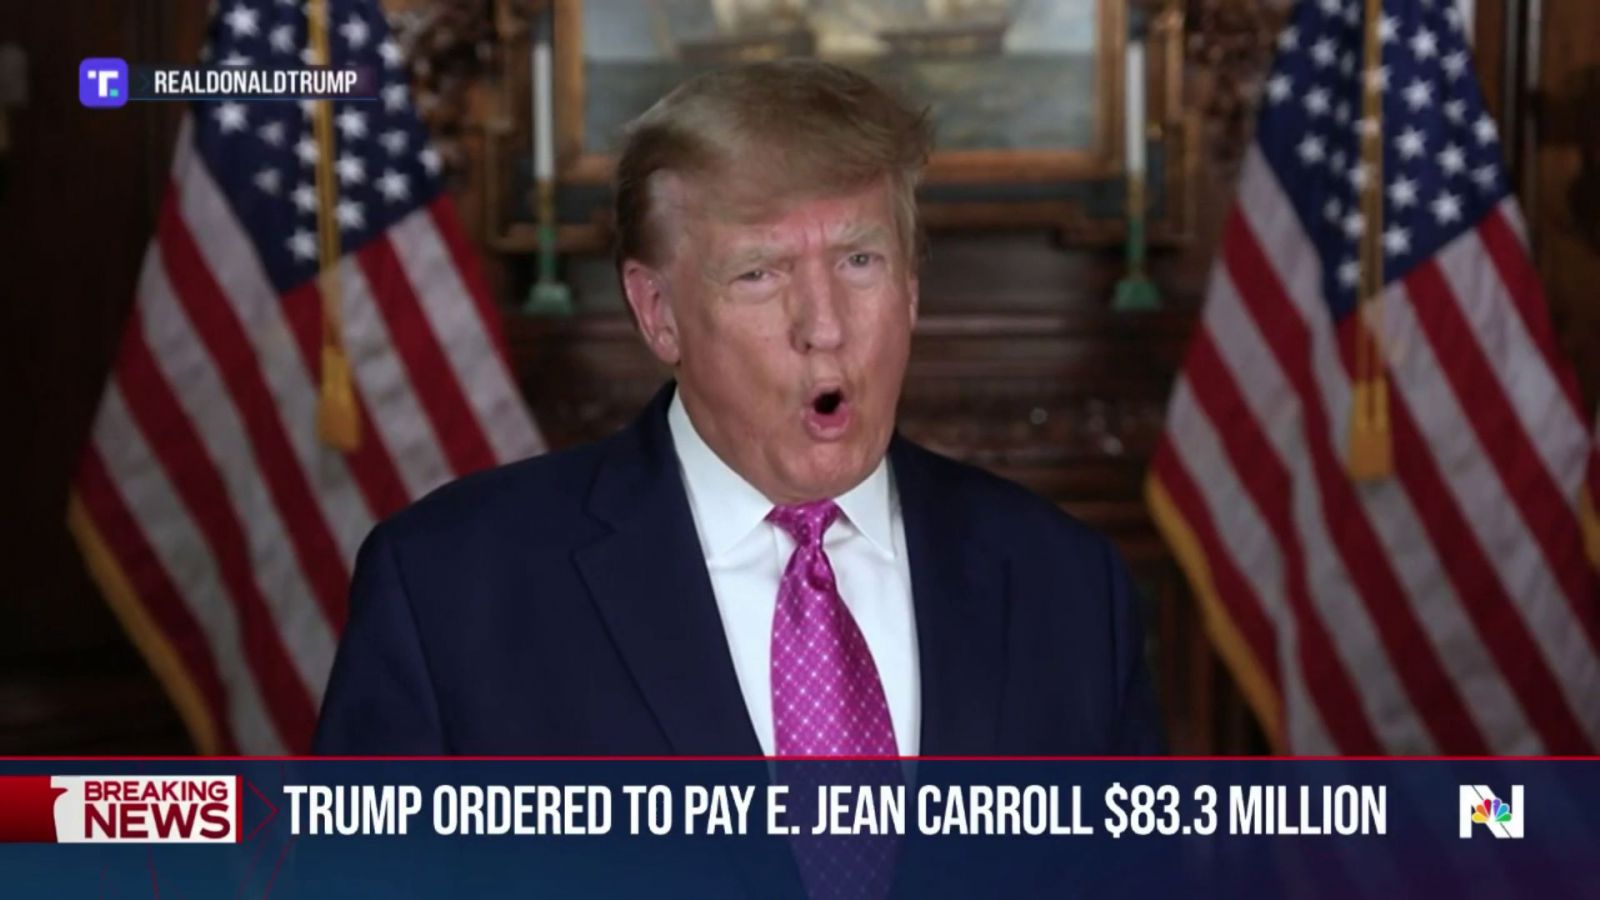 VIDEO Jury orders Trump to pay E. Jean Carroll $83.3 million in defamation damages, Trump’s team reached out to RFK Jr. ‘early on’D about serving as VP: ‘Wouldn’t write it off’, Donald Trump 2024 news, Former President Donald Trump, Video Donald Trump Disqualified, Donald Trump talks about his 2024 presidential candidacy, Latest news Donald Trump Disqualified, Video Donald Trump wins Iowa, Video news Donald Trump Disqualified, Clip Donald Trump Disqualified, Donald Trump Victory Iowa, President Donald Trump, VIDEO Donald Trump Delivers a Victory Speech at Iowa caucuses on January 15 2024, Video Donald Trump 2024, Former President Donald Trump won the Iowa caucus, Donald Trump, Donald Trump Republican, Donald Trump Disqualified from 2024 Ballot In Colorado Court, News Donald Trump Disqualified, Donald Trump says he has decided on 2024 running mate but refuses, Donald Trump 2024, Newest Donald Trump Disqualified